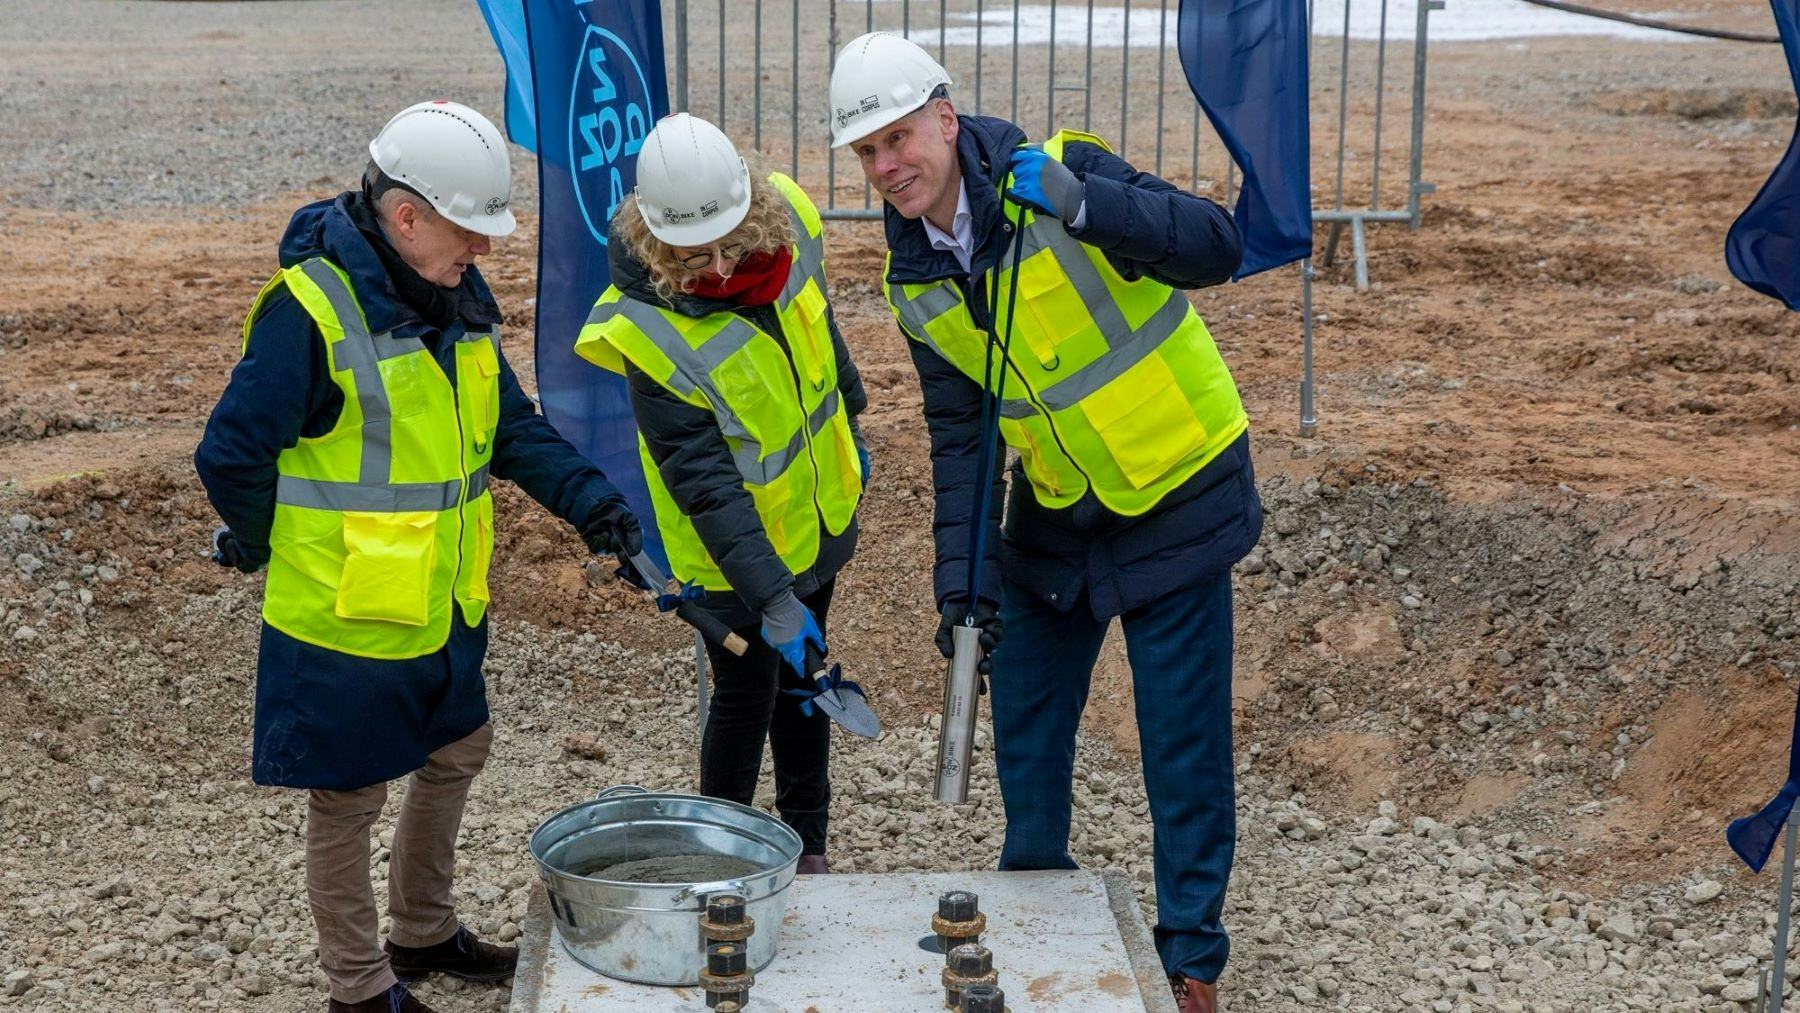 A symbolic time capsule has been buried in the foundations of the 40,000 square metre building of Pon.Bike’s new factory in Lithuania. – Photo Pon.Bike